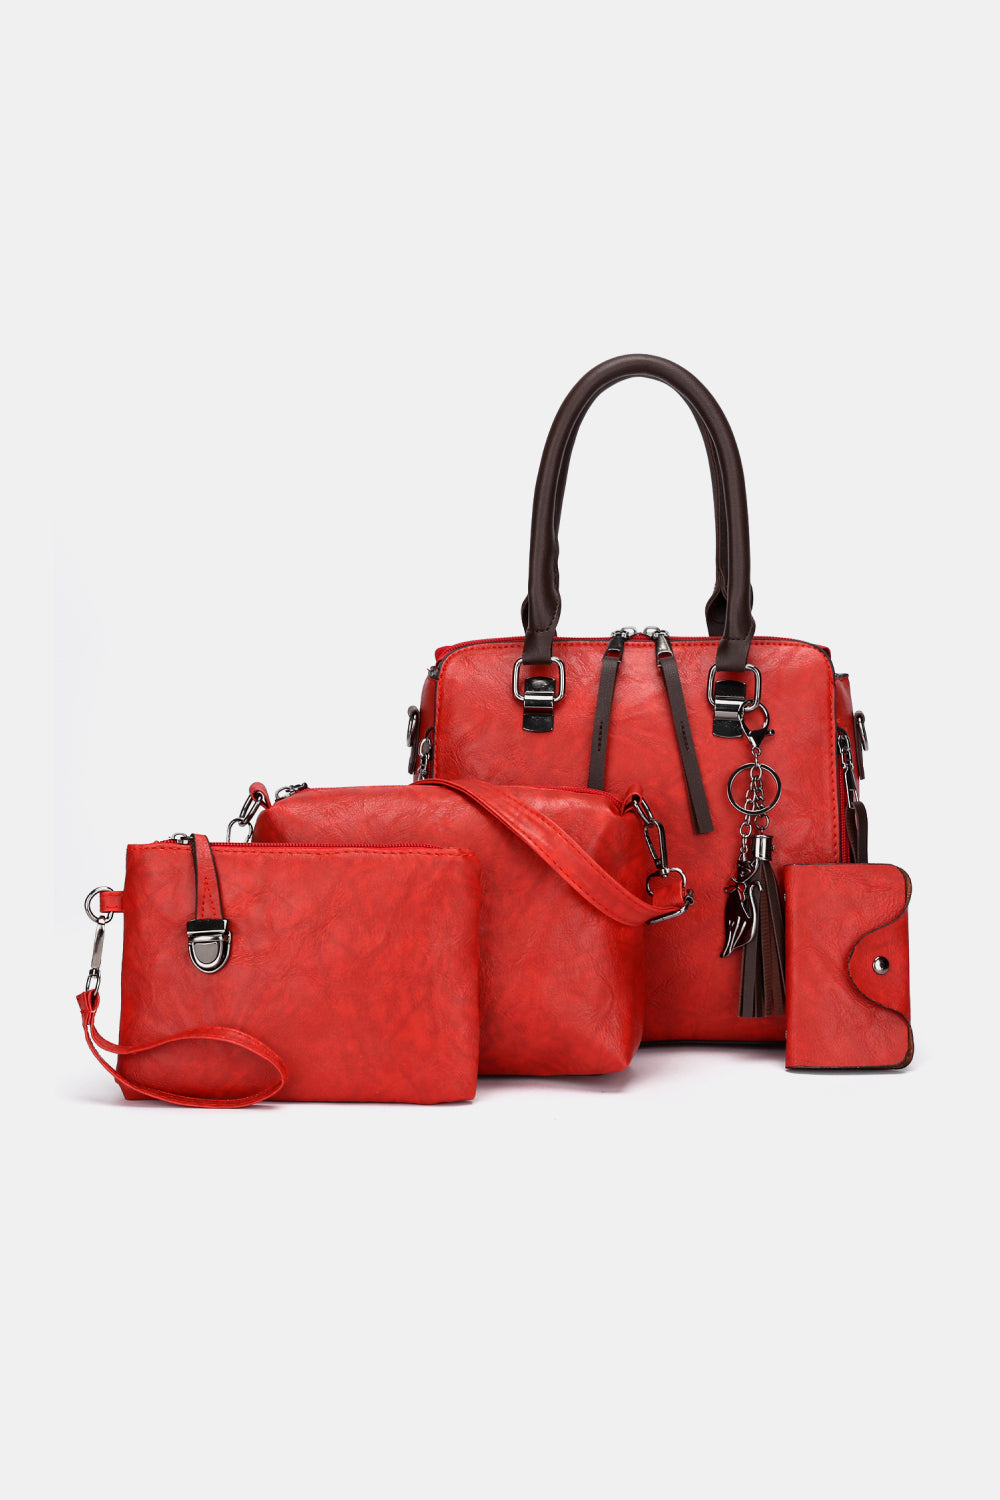 4-Piece PU Leather Bag Set The Stout Steer